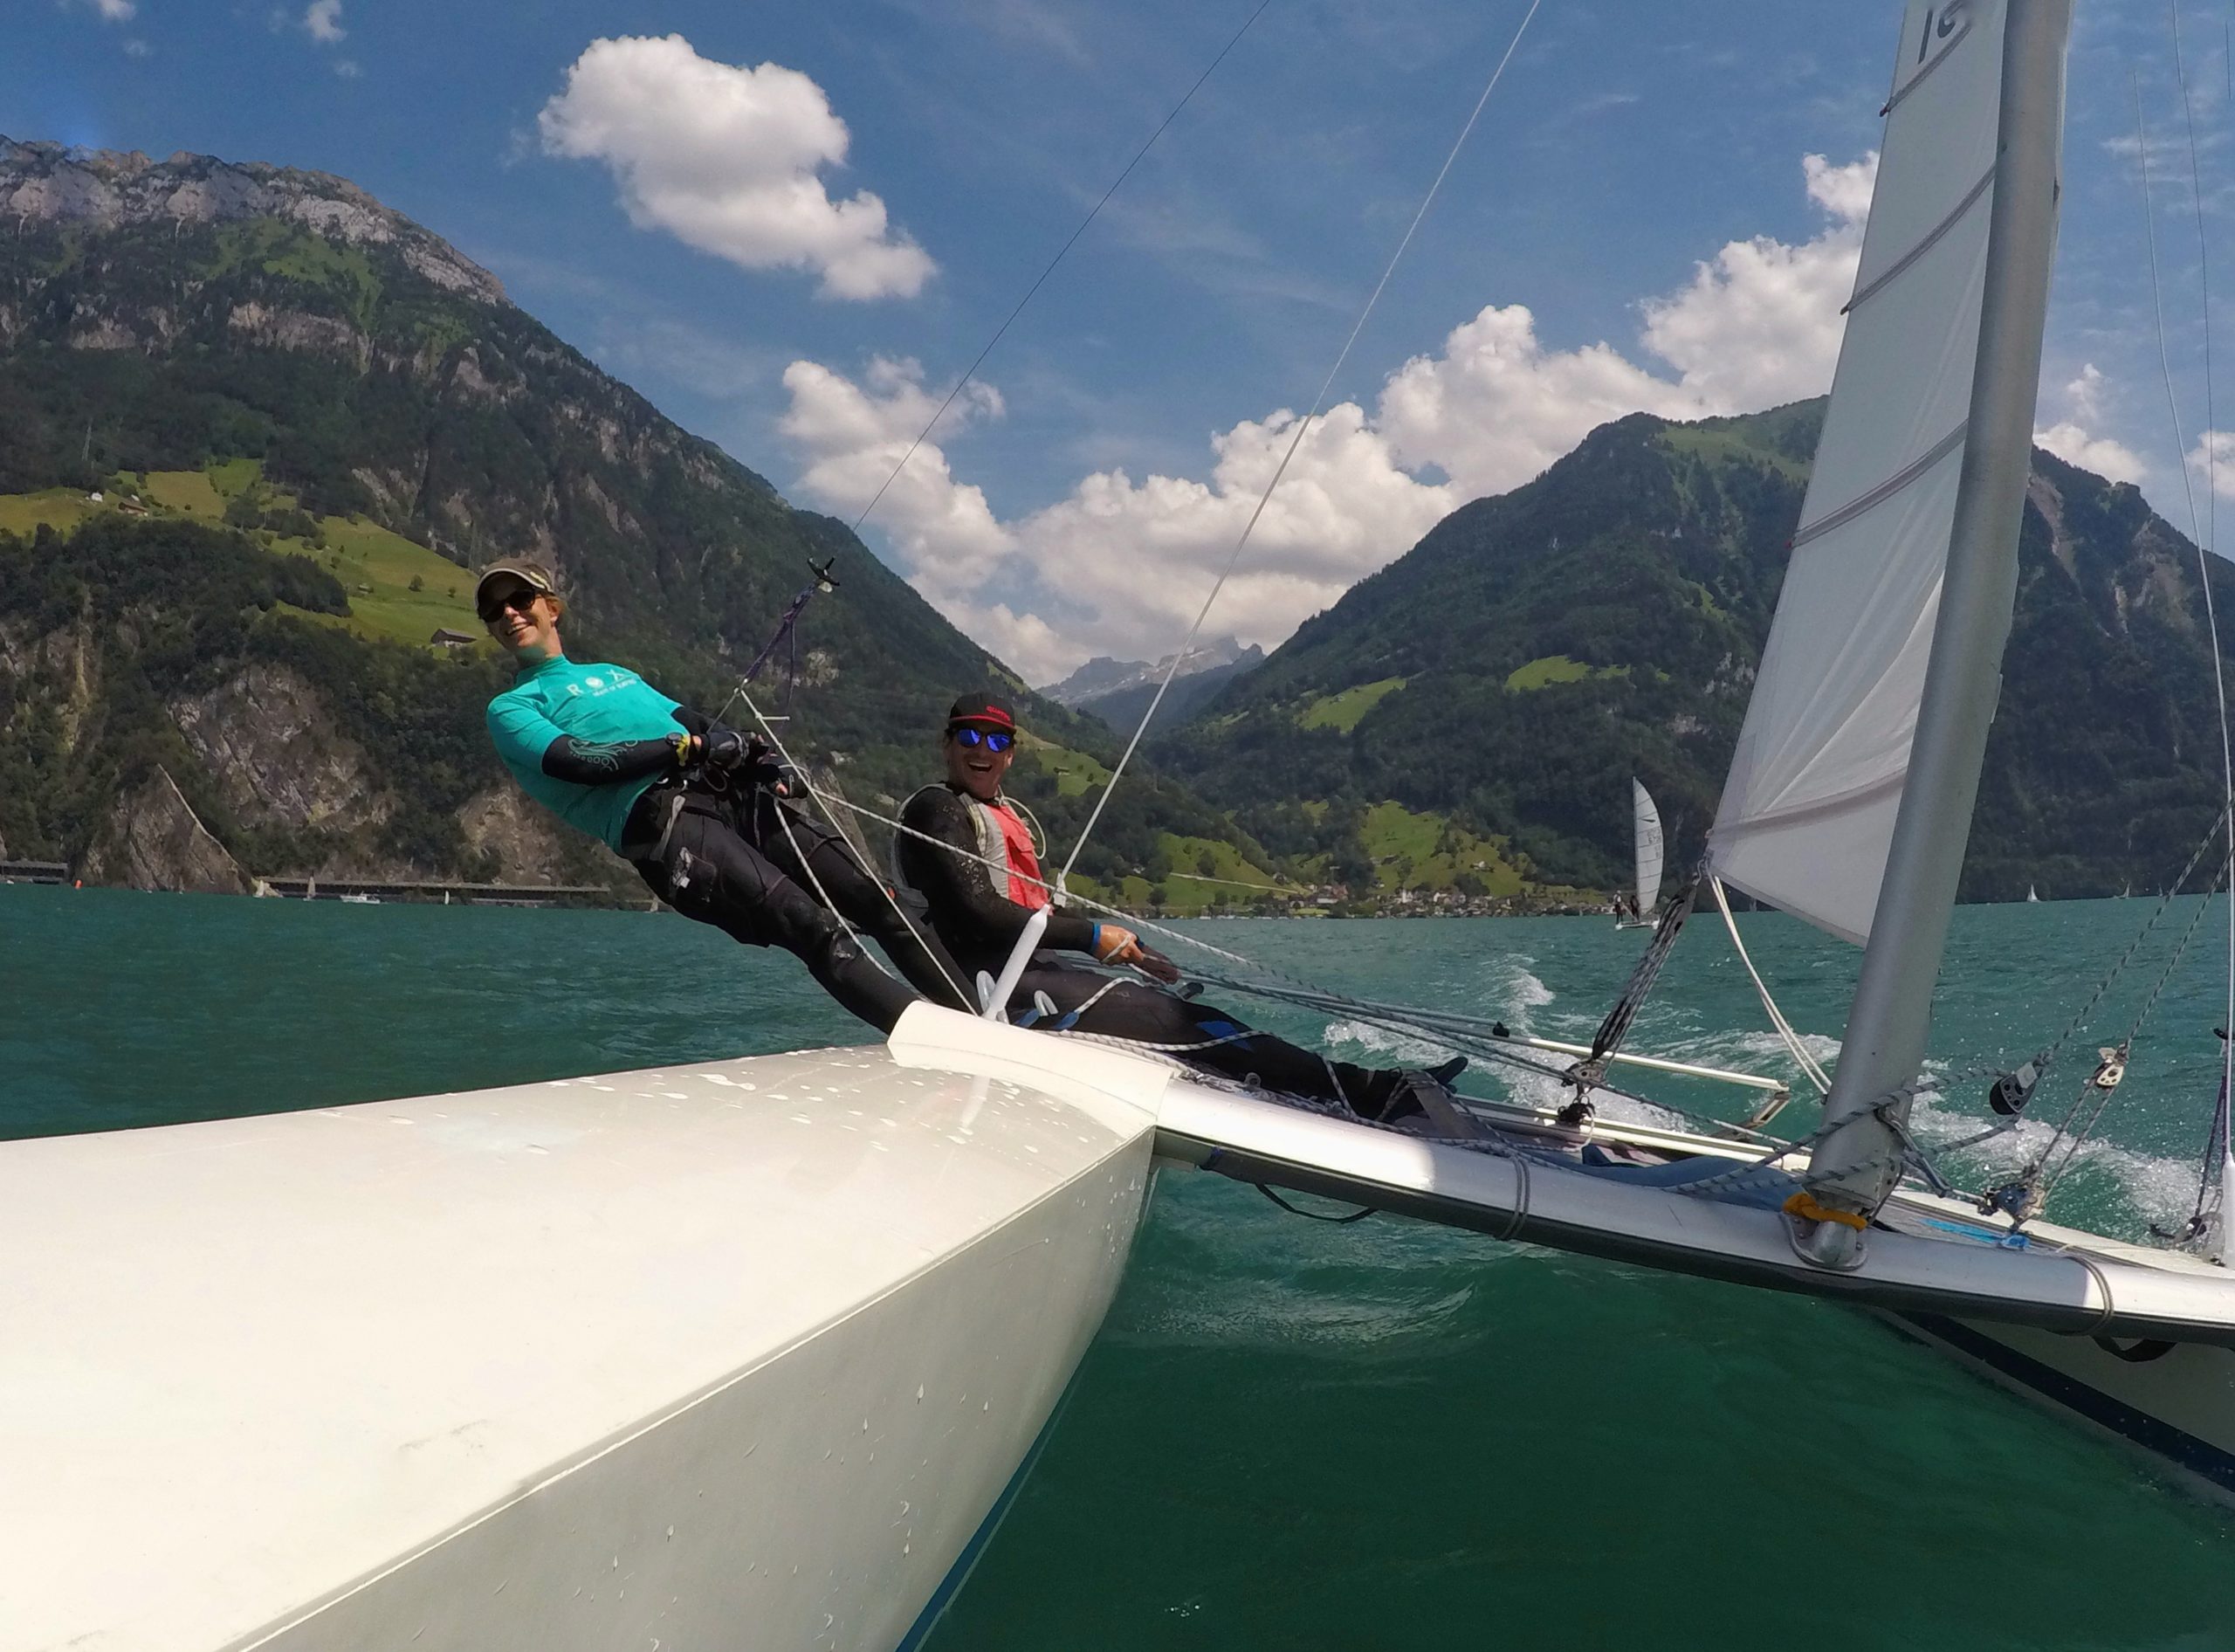 Wannabe Watersports - Watersports in & around Switzerland. Passionate about Sailing, Windsurfing, Stand Up Paddle (SUP) or anything that get’s us wet.